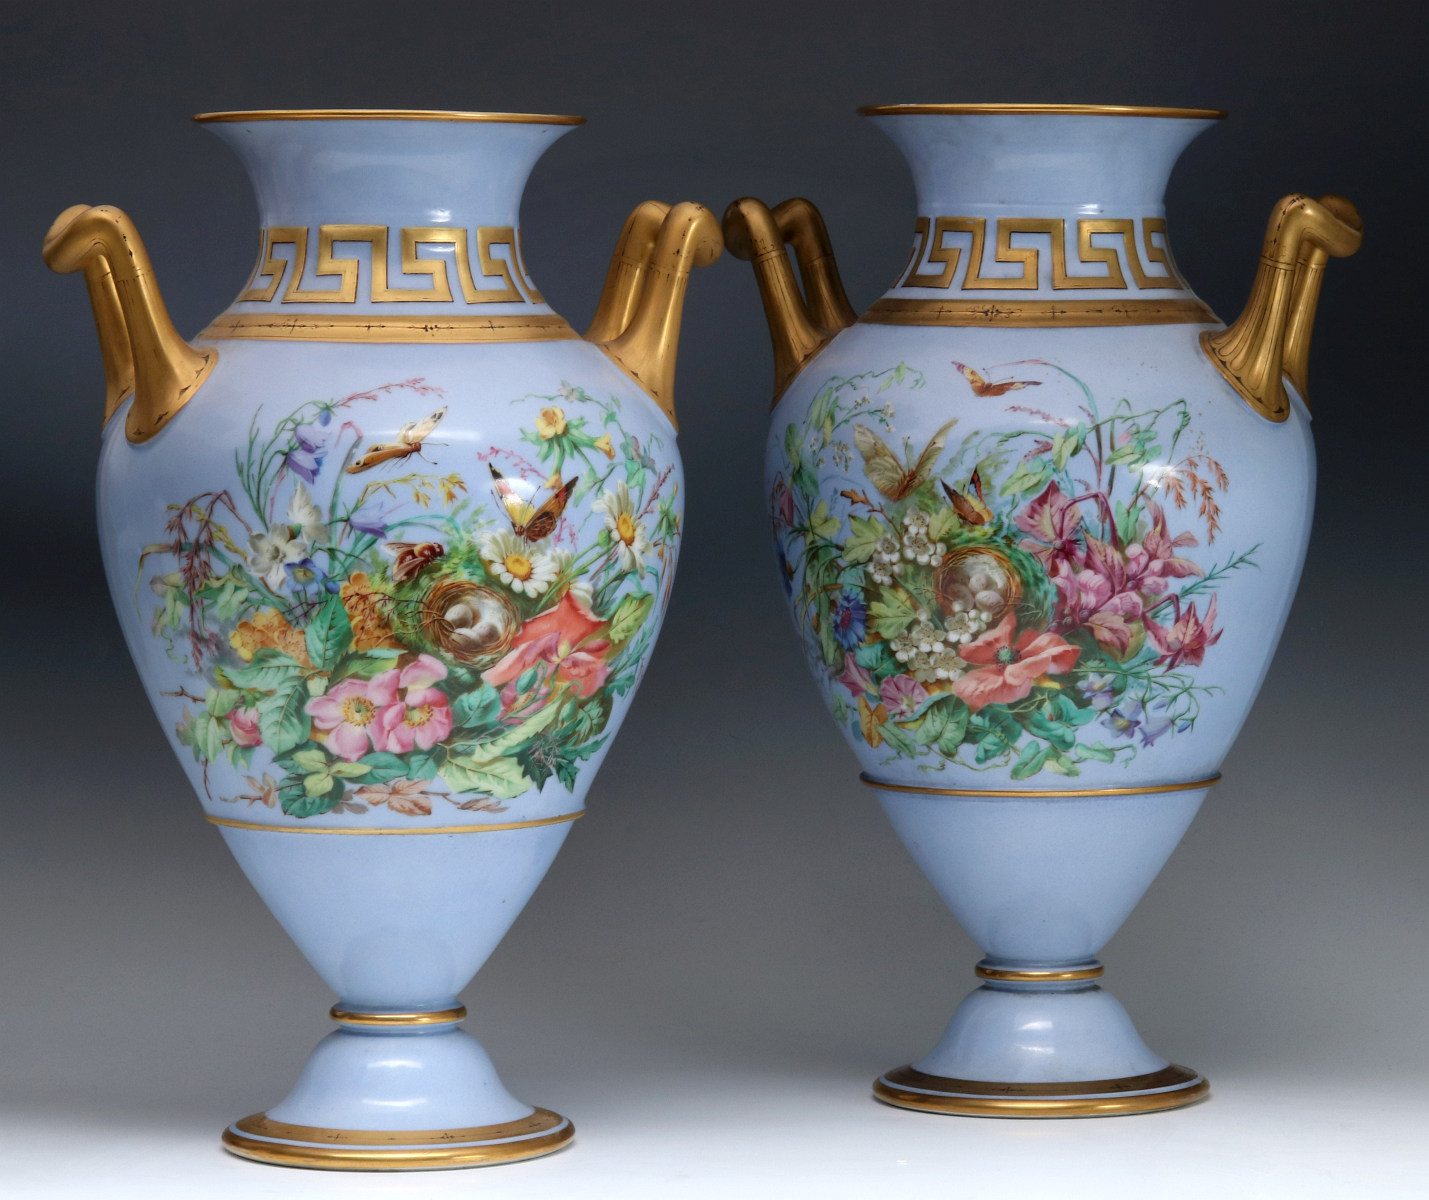 A PAIR VERY FINE FRENCH 19TH CENT PORCELAIN URNS